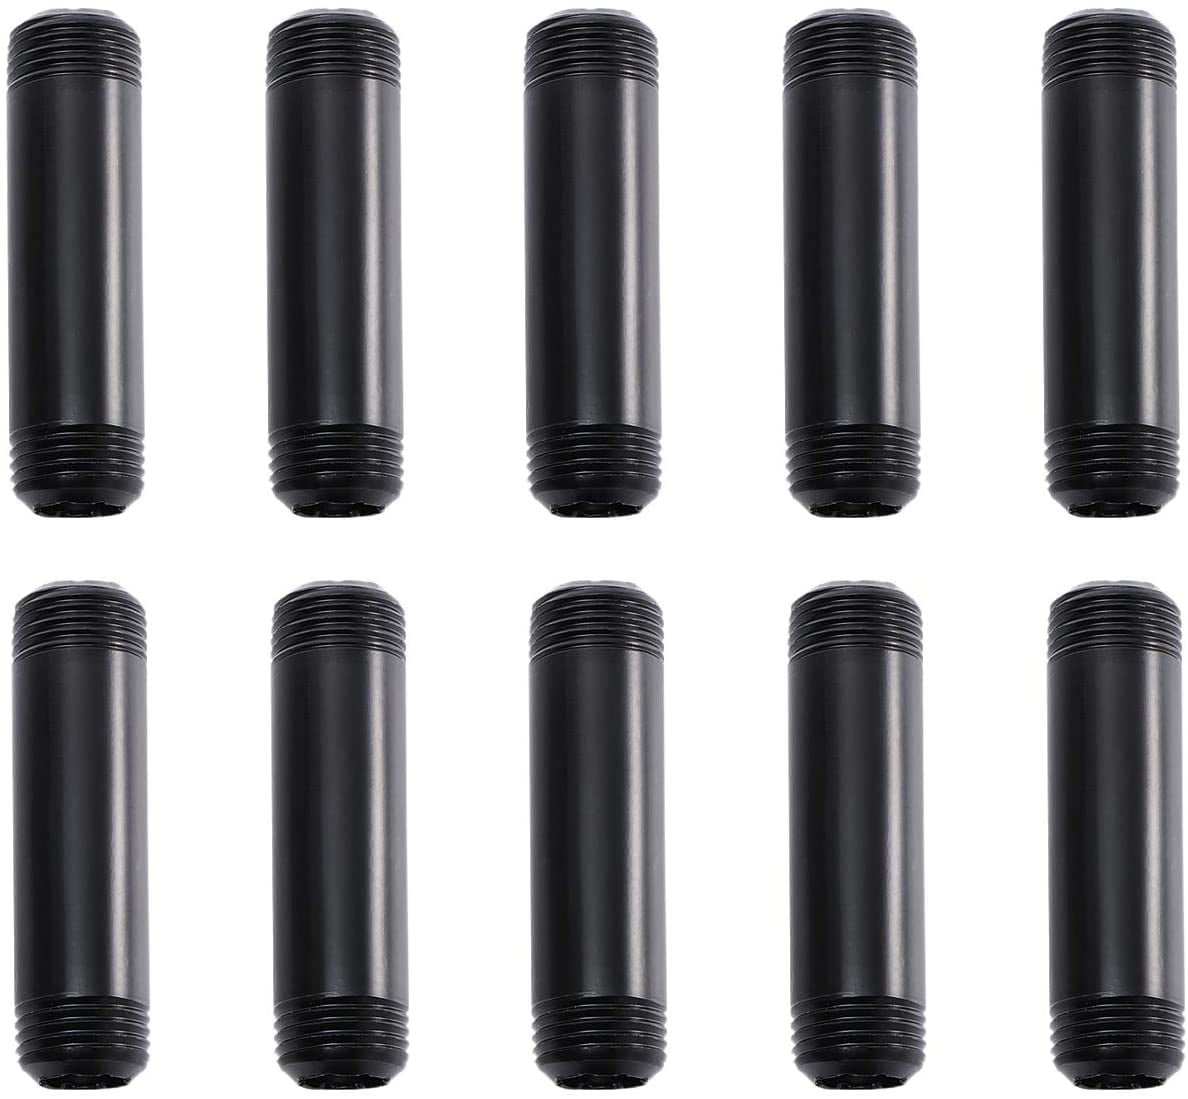 1/2"X 4",6",8",12" Long Nipple Black Malleable Iron Pipe Fitting Threaded 10Pack 